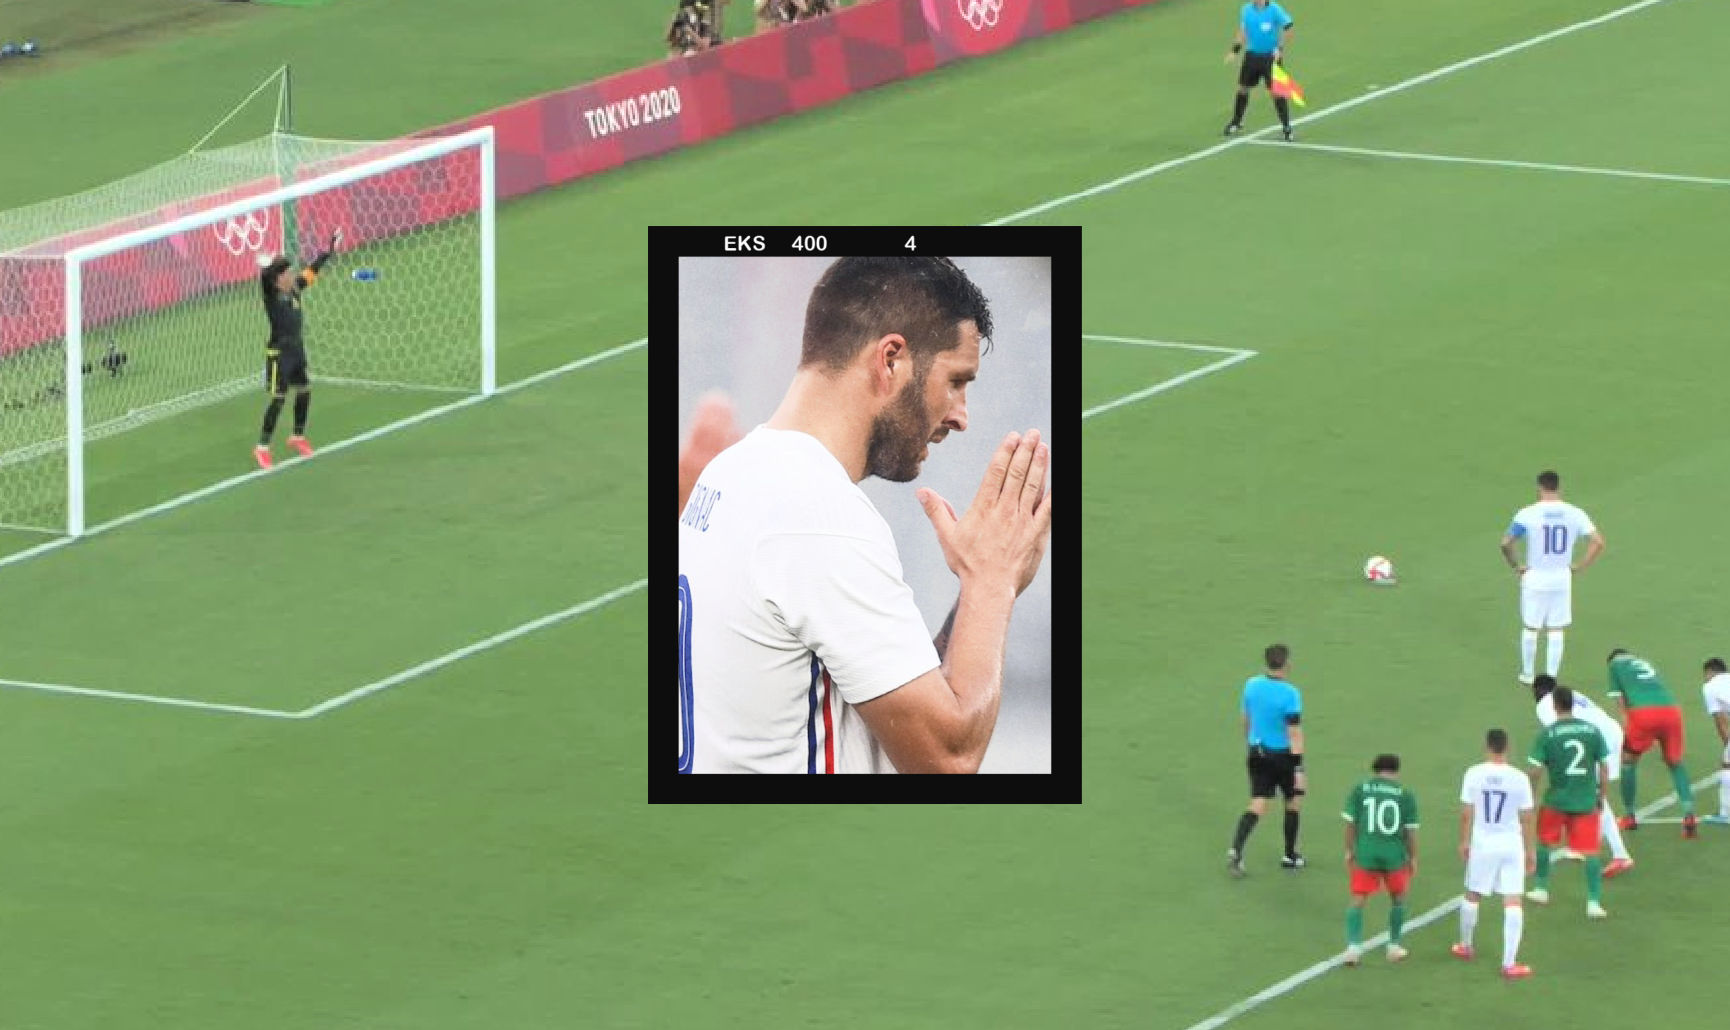 Andre-Pierre Gignac scored a penalty against Mexico in the Olympics and apologised during his celebration